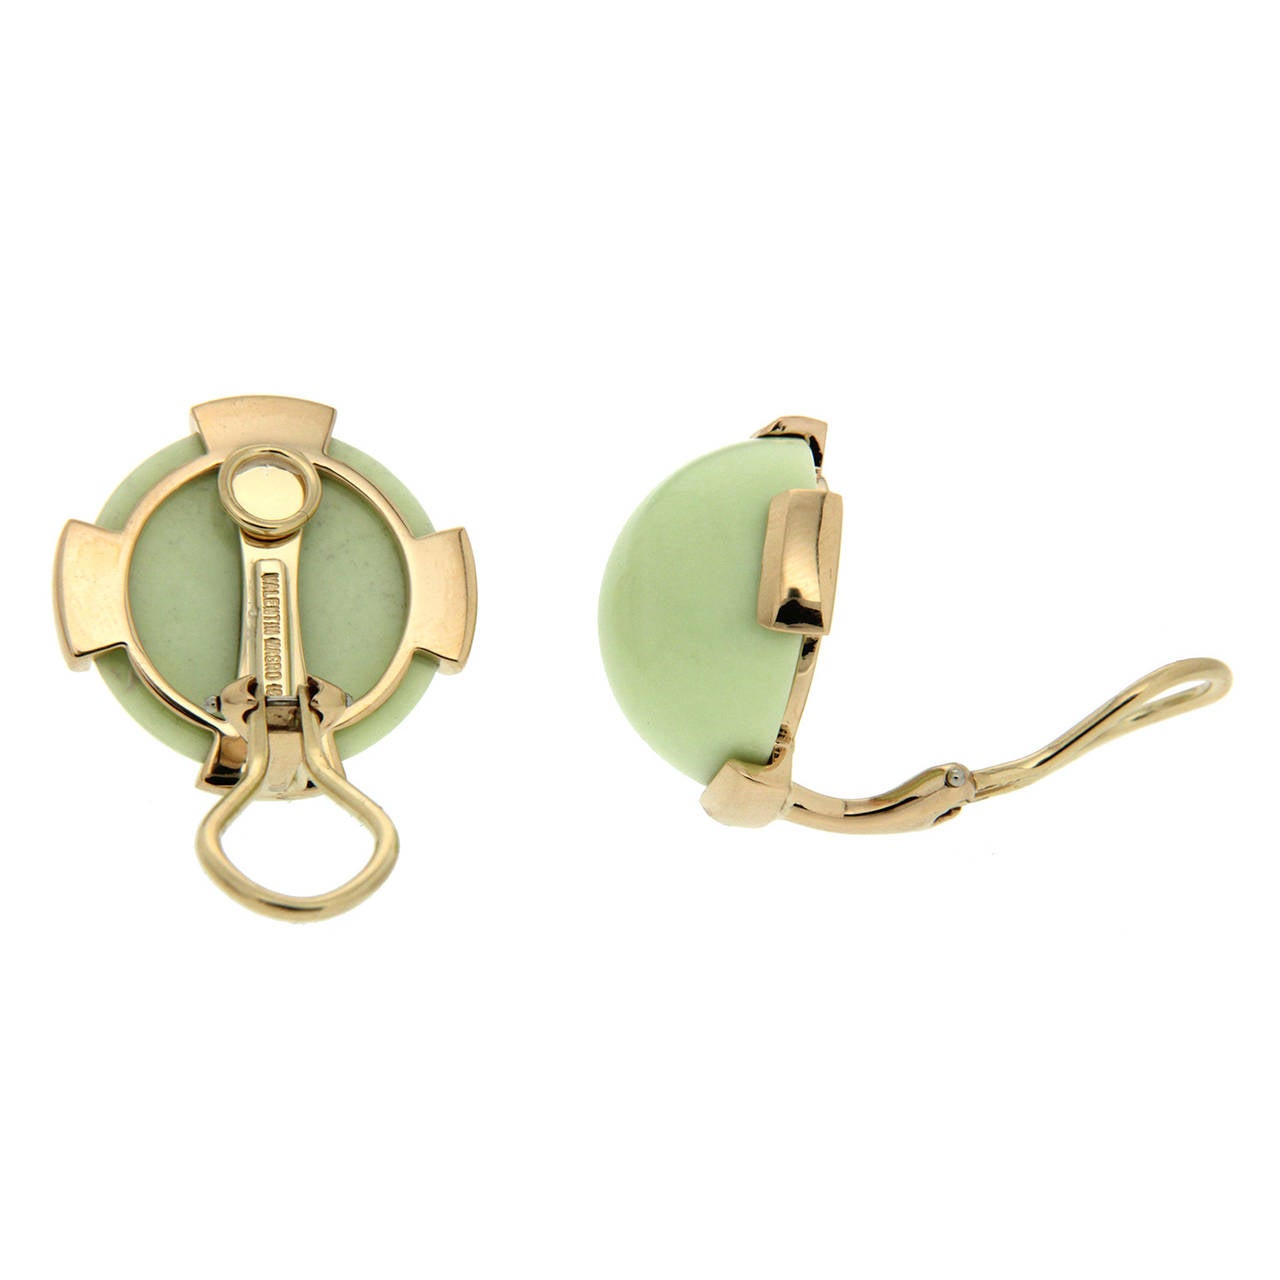 Lovely Round Cabochon Chrysoprase Earrings in 18K Yellow Gold with clip backs.